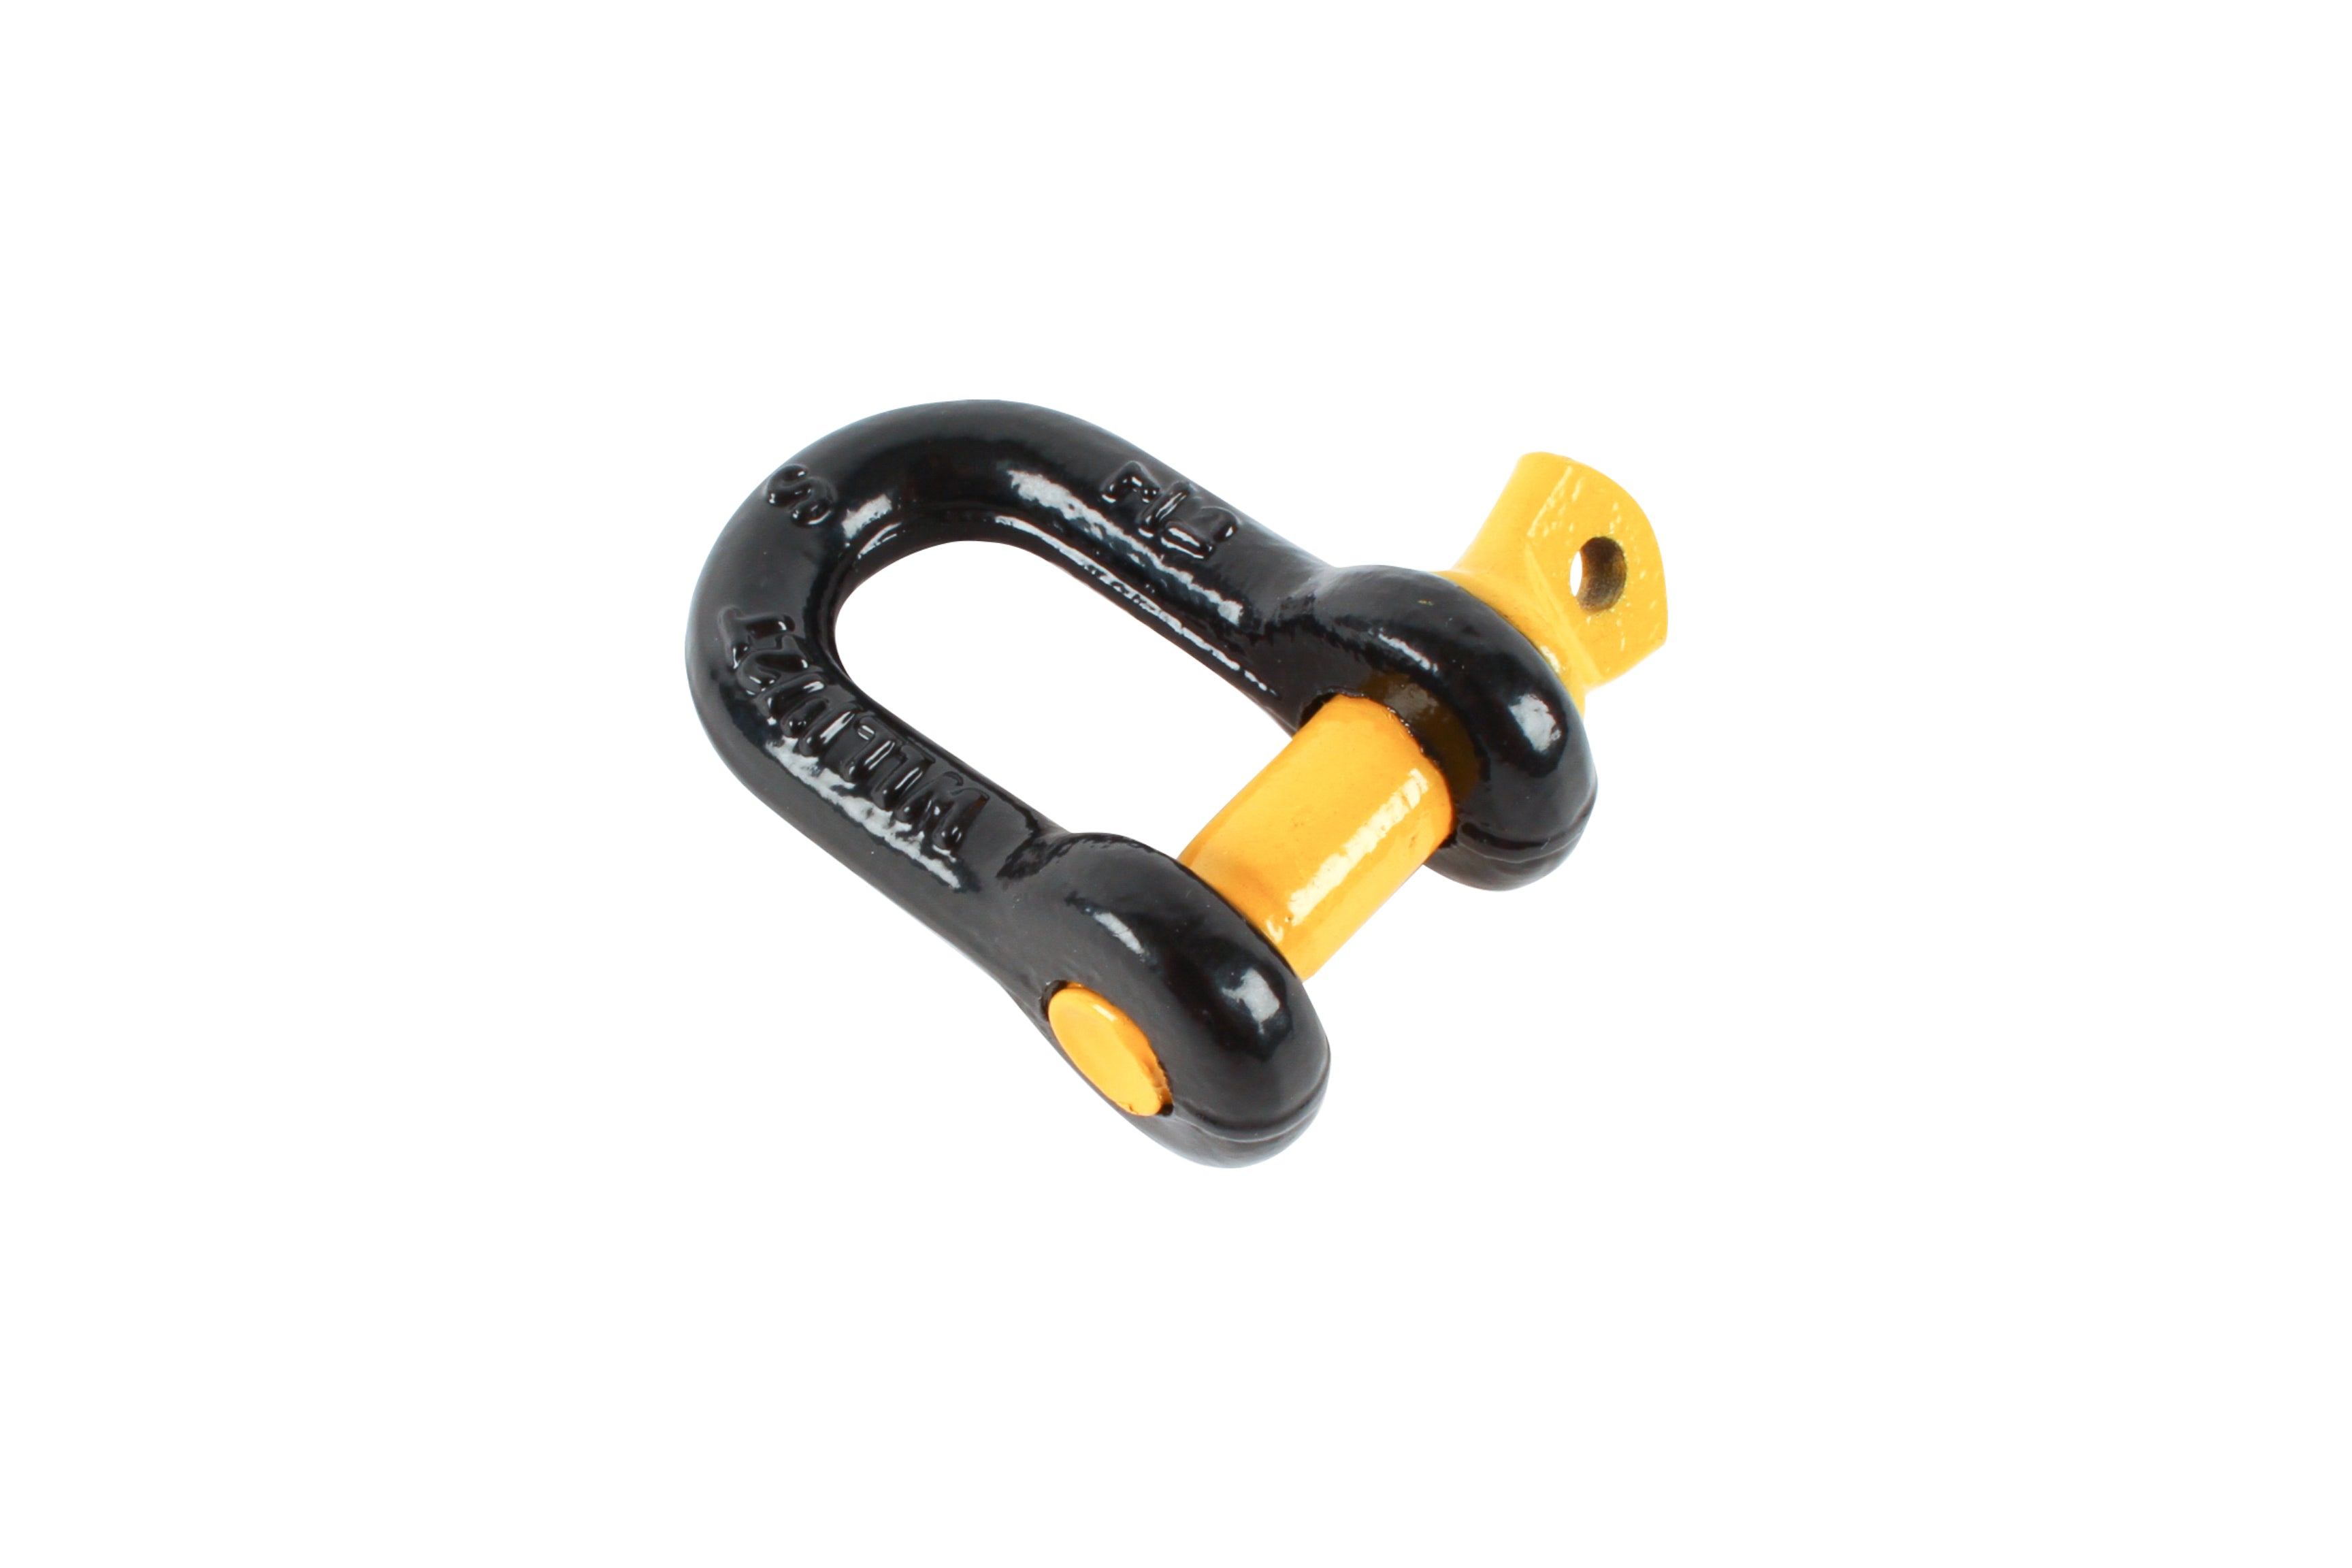 D SHACKLE RATED 1500KG